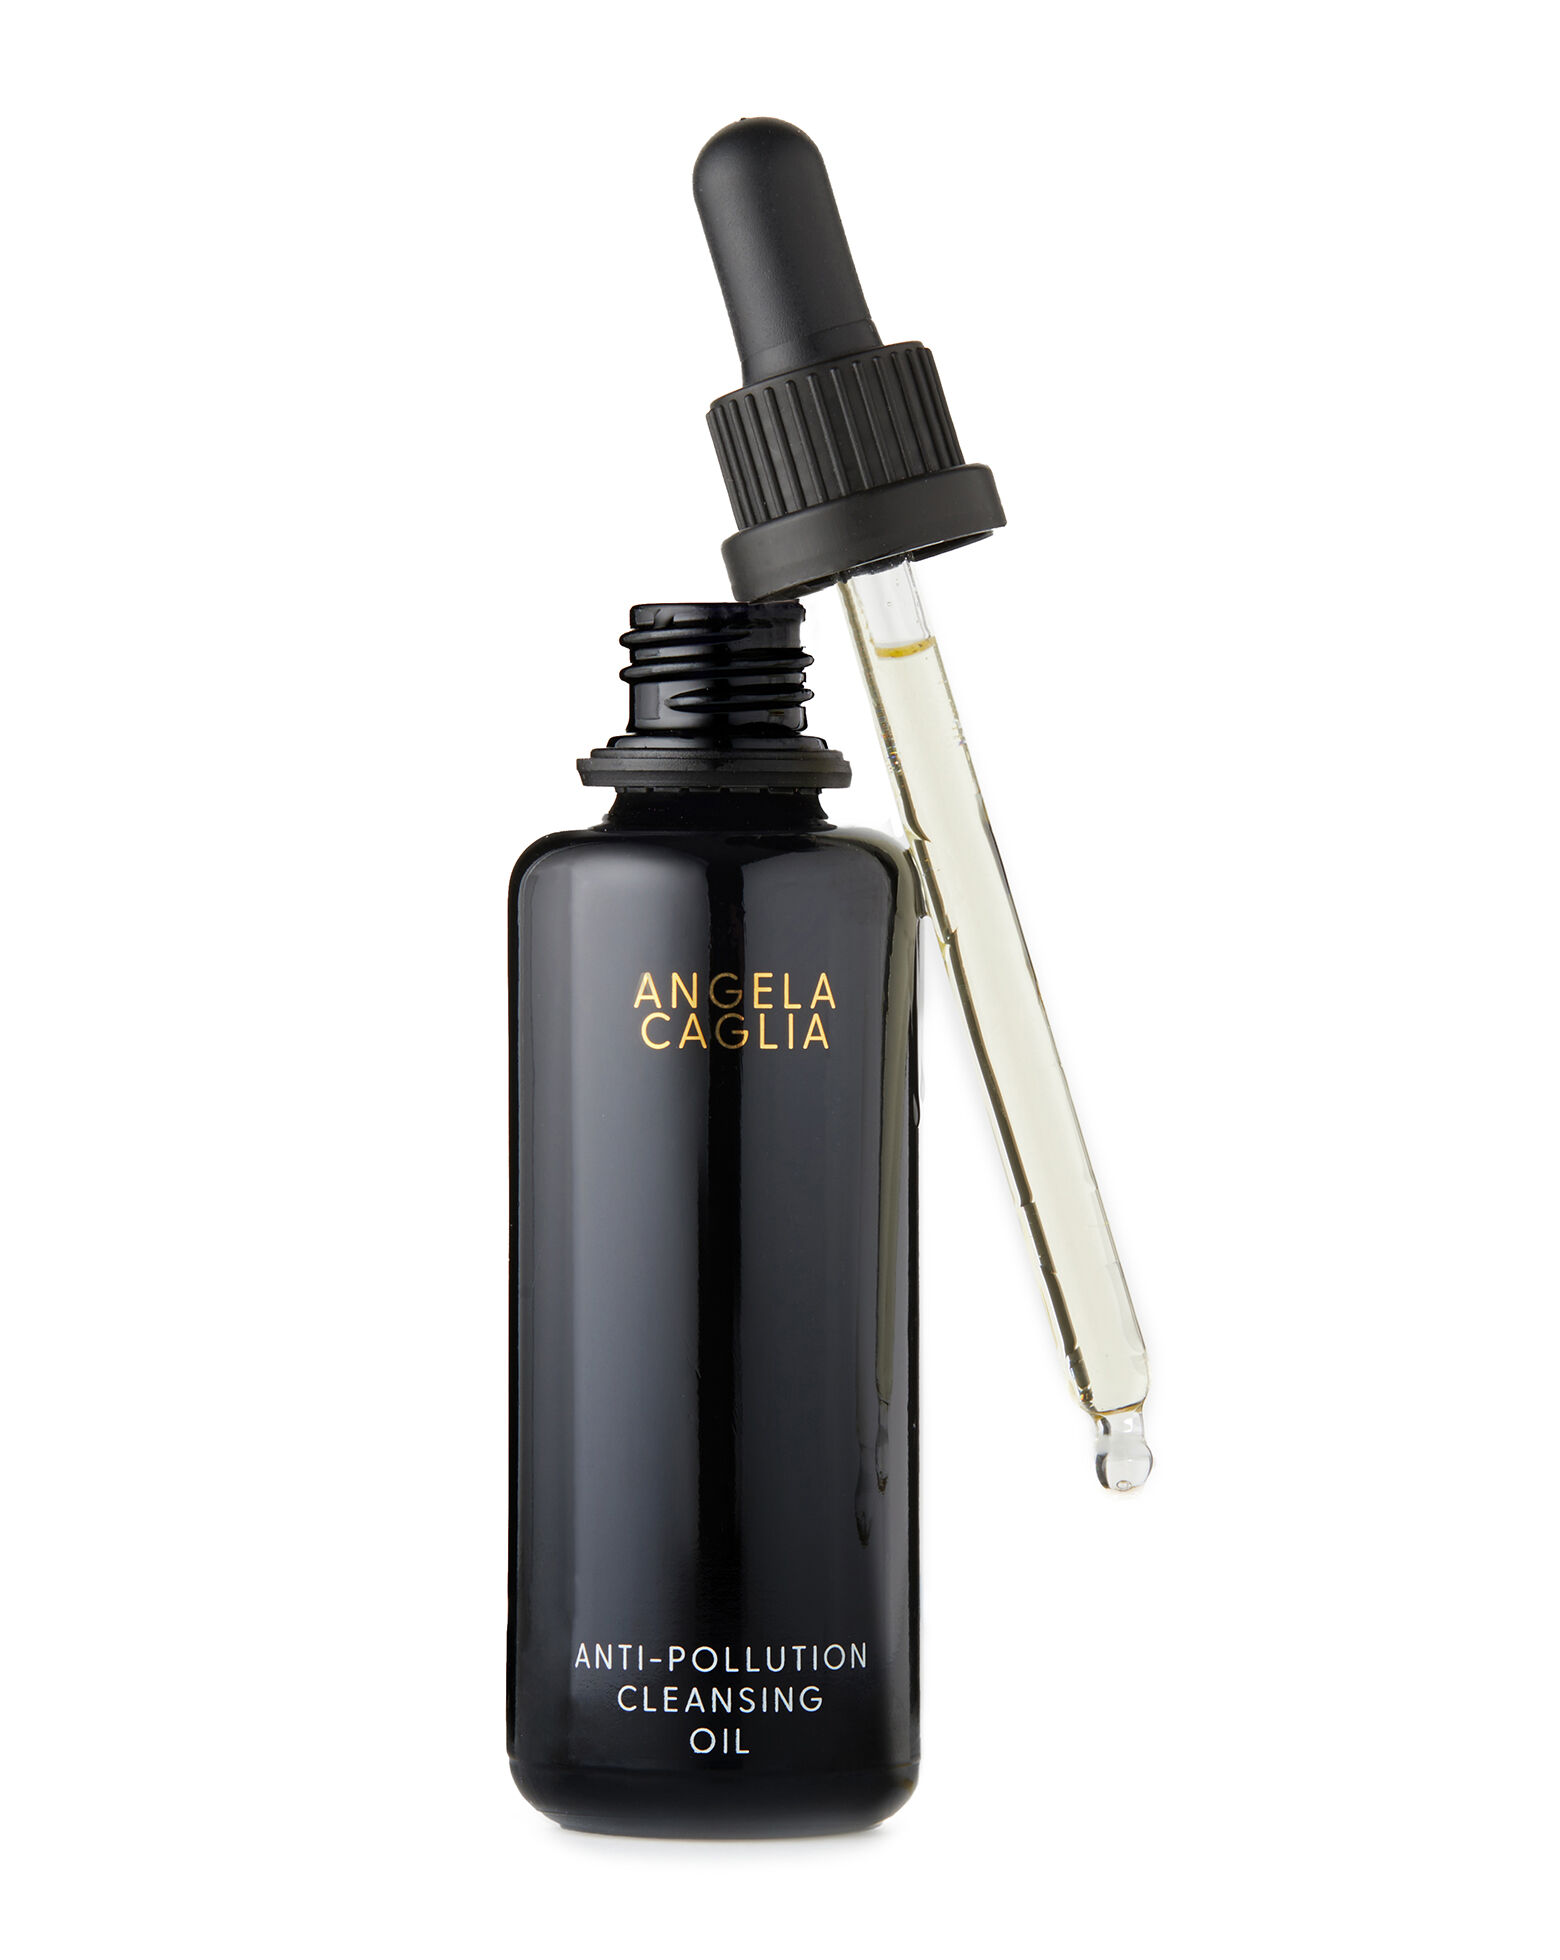 Angela Caglia - Anti-Pollution Cleansing Oil